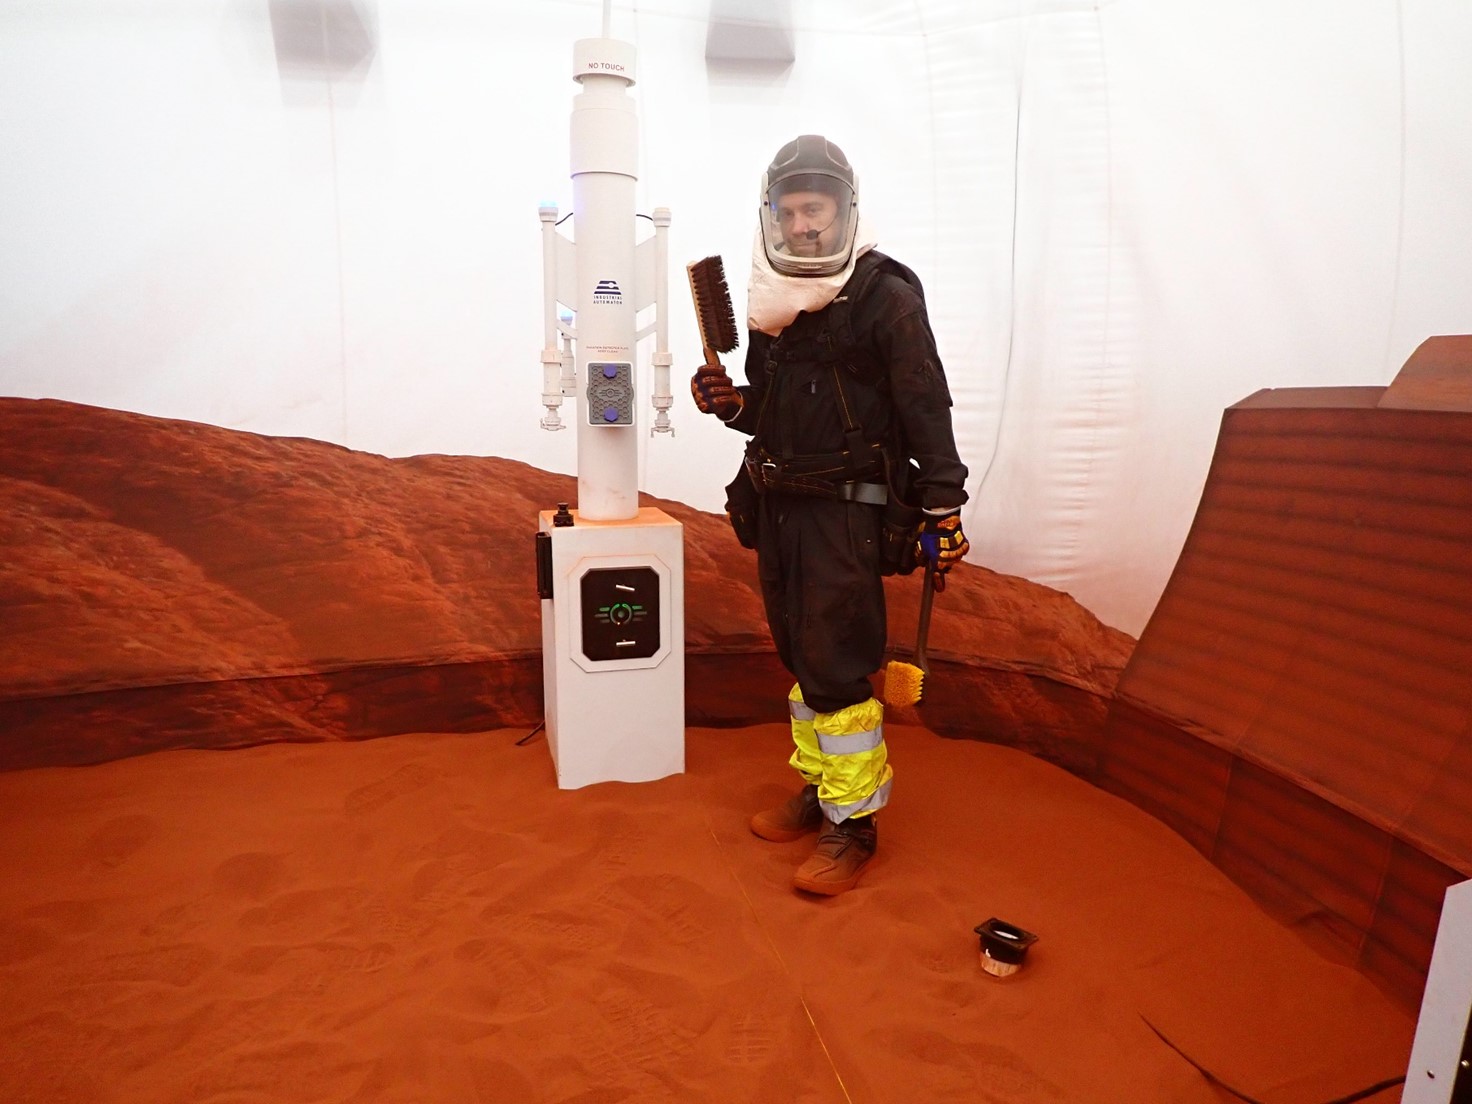 Nathan Jones participates in a simulated “Marswalk” inside the 1,200 square foot sandbox, which is connected to the habitat through an airlock.